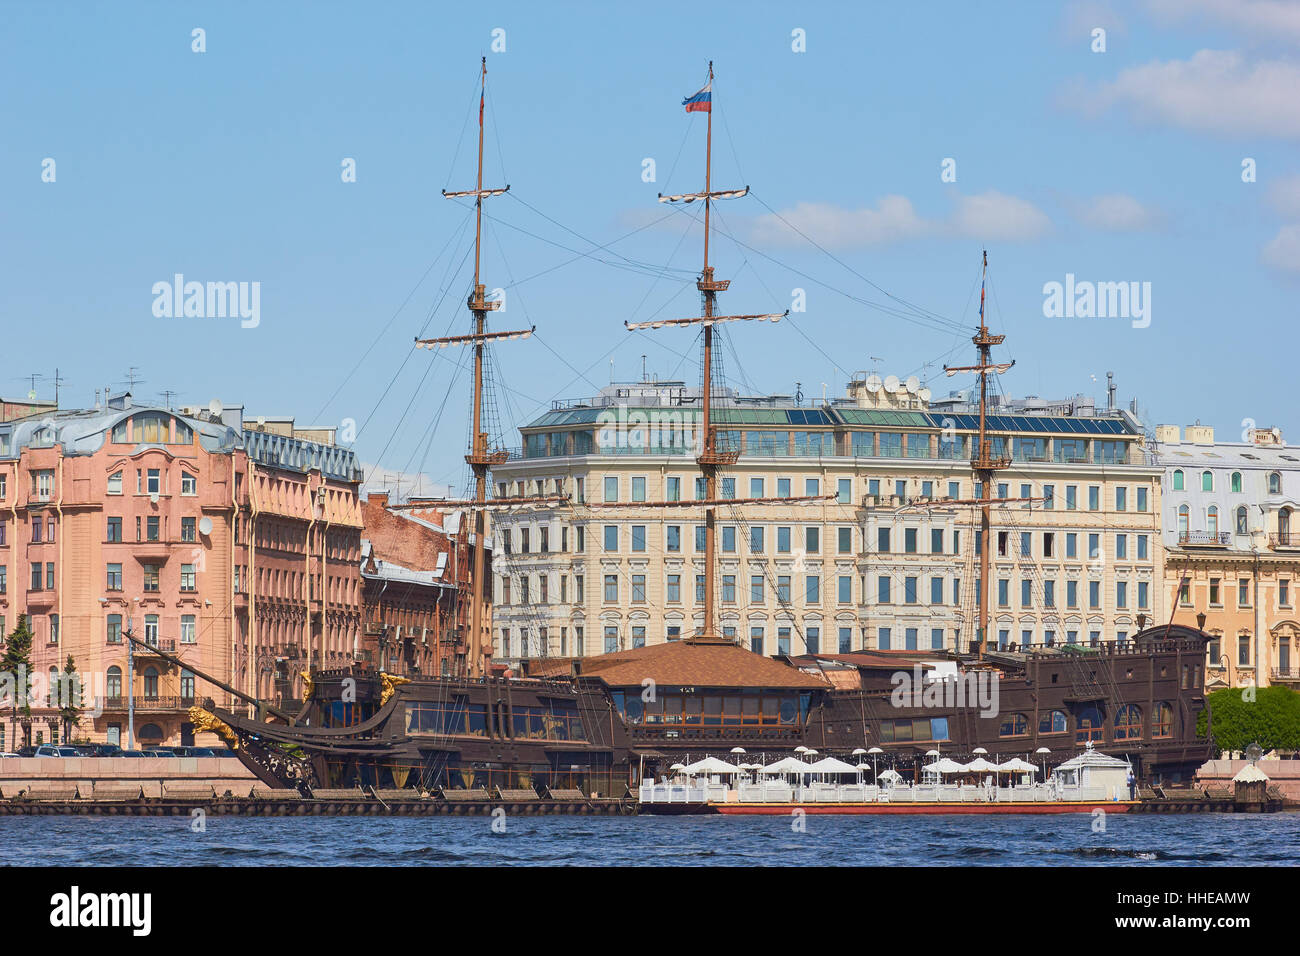 Restaurant ship the Flying Dutchman moored on the river Neva St Petersburg Russia Stock Photo